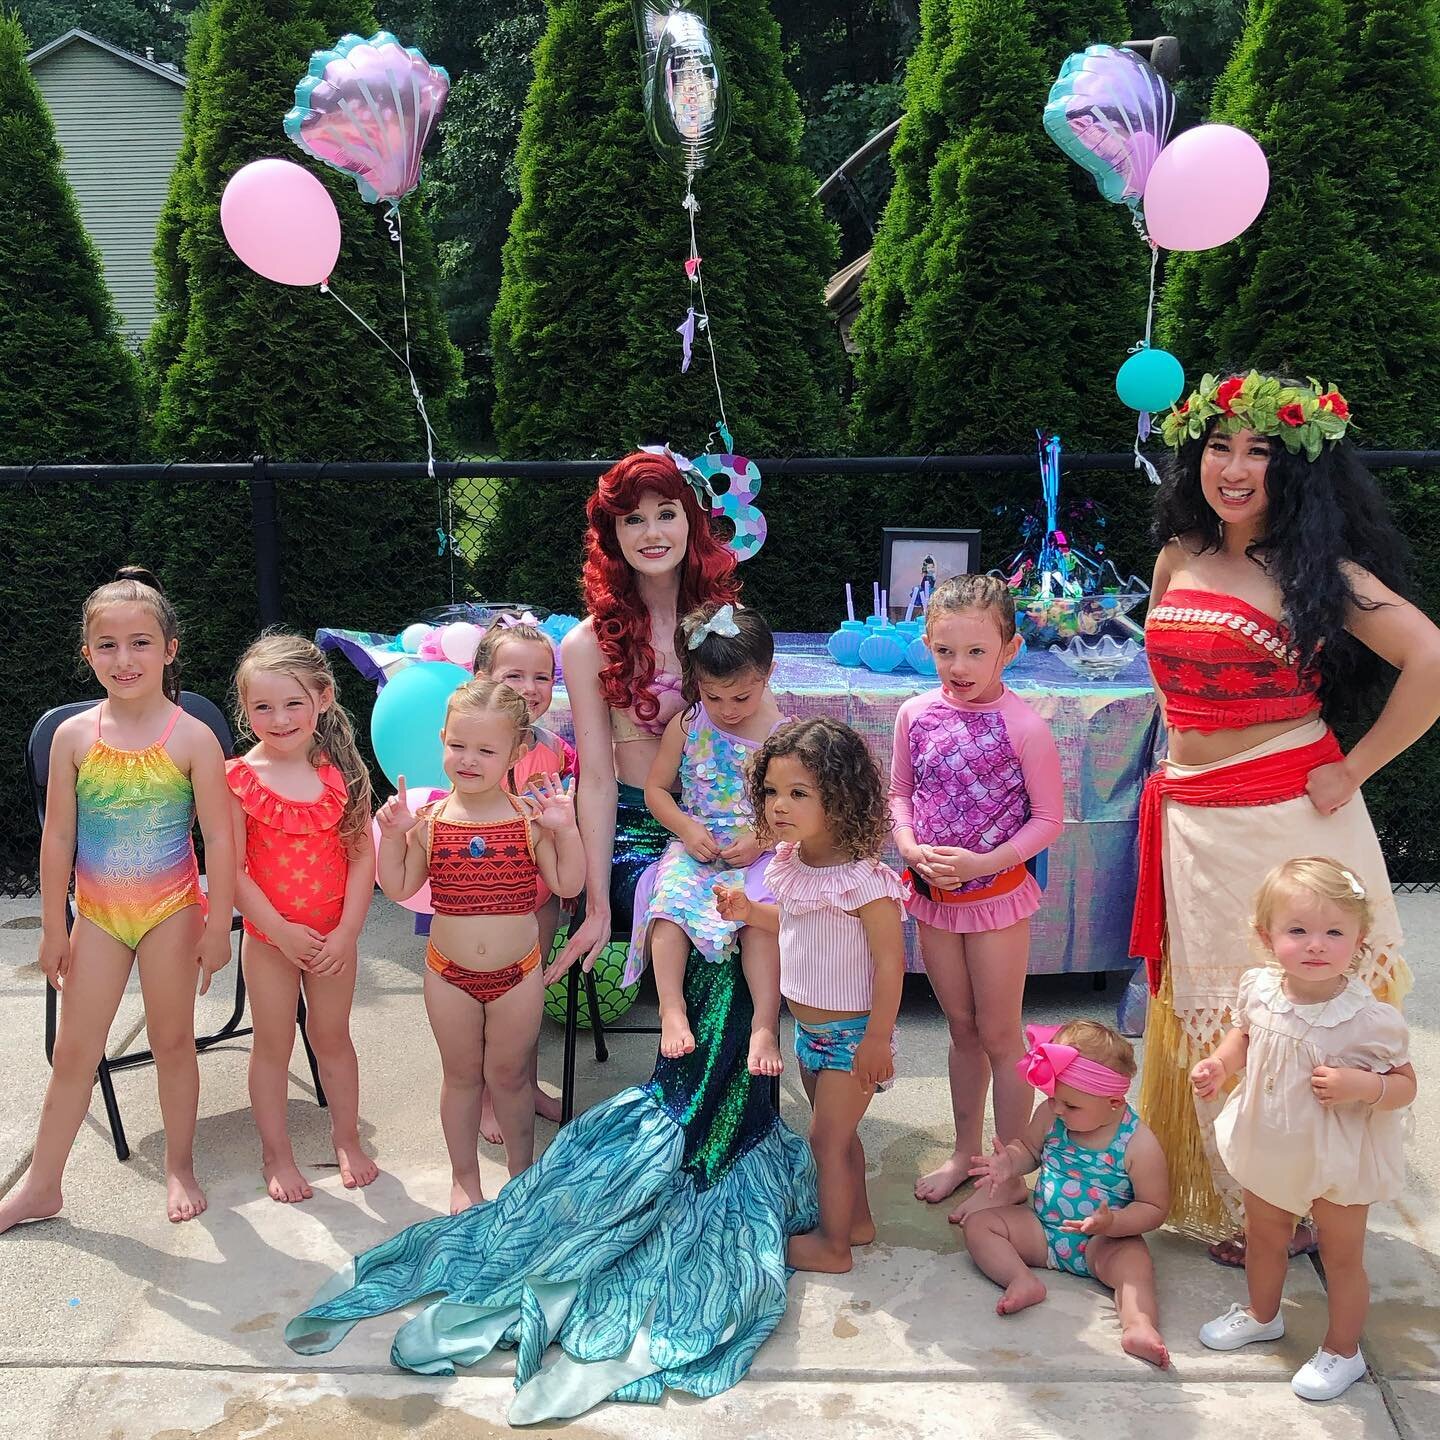 Let's Shell-ebrate! 
✨🐚✨
Invite our Mermaid Princess and Voyager Princess together to your next party or event for an ocean of fun! 
🌊🌊🌊🌊
Book at www.sparkadreamprincessparties.com!
.
.
.
.
.
.
.
.
.
.
.
.
.
.
.
.
.
.
.
.
.
#DanversMa #SalemMa #